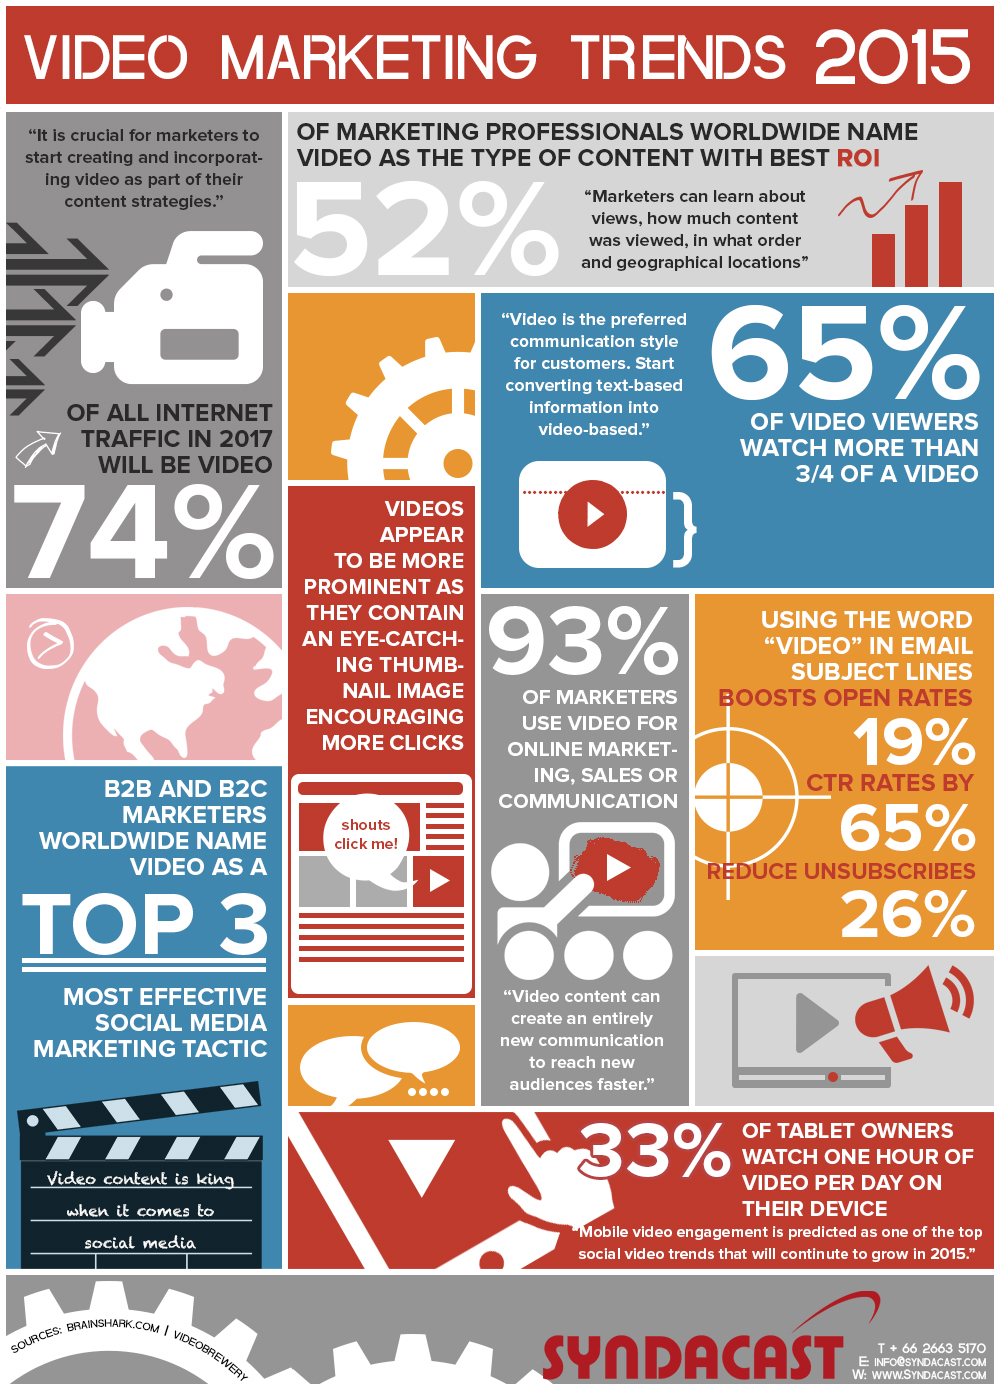 Video Marketing Statistics and Trends 2015